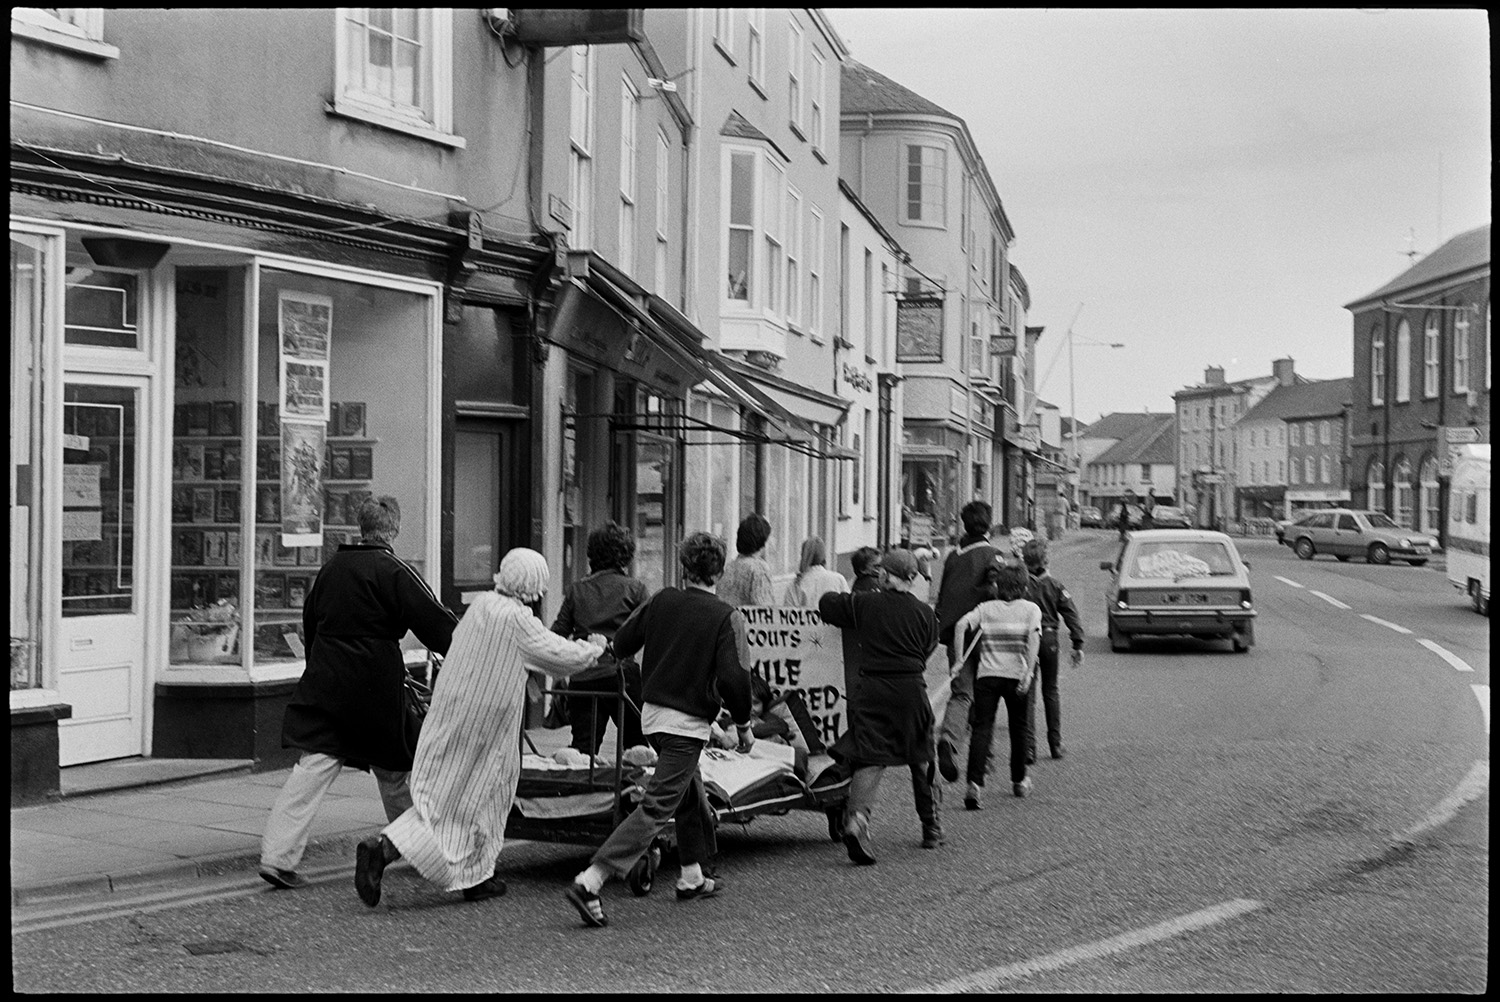 Scouts on sponsored walk pushing bed through town. 
[A group of Scouts on a 7 mile sponsored walk pushing and pulling a make-shift bed on wheels, with a child in it, through a street in South Molton, past shop fronts. Some of them are in fancy dress. A car is driving ahead of them.]